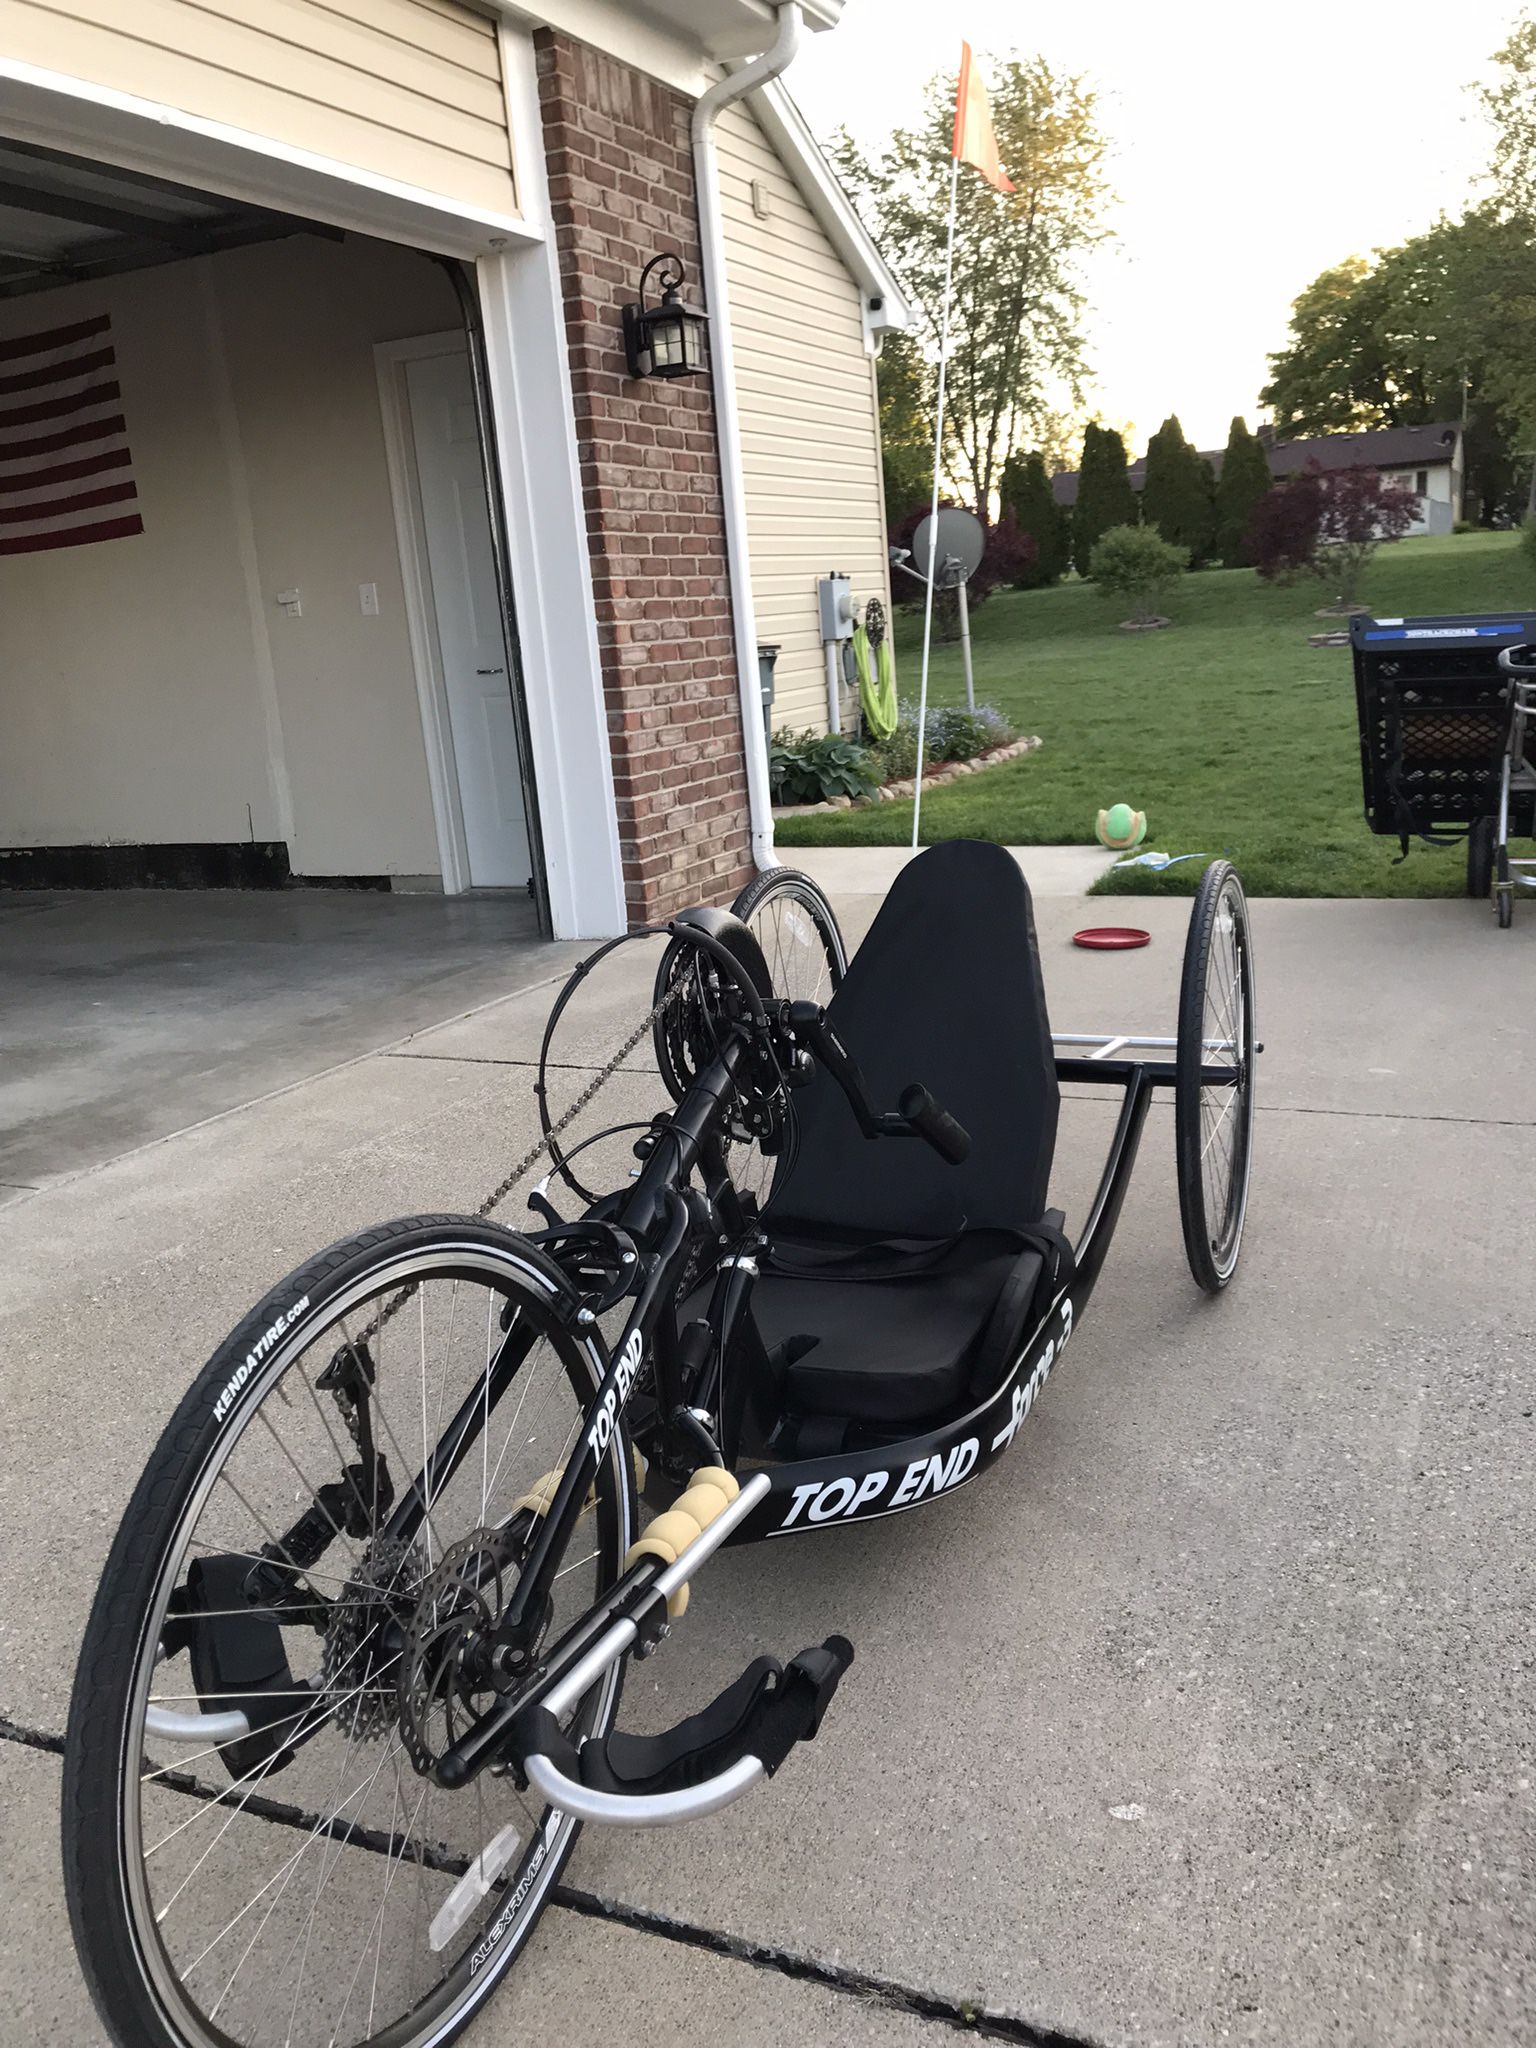 Force 3 Hand Cycle 